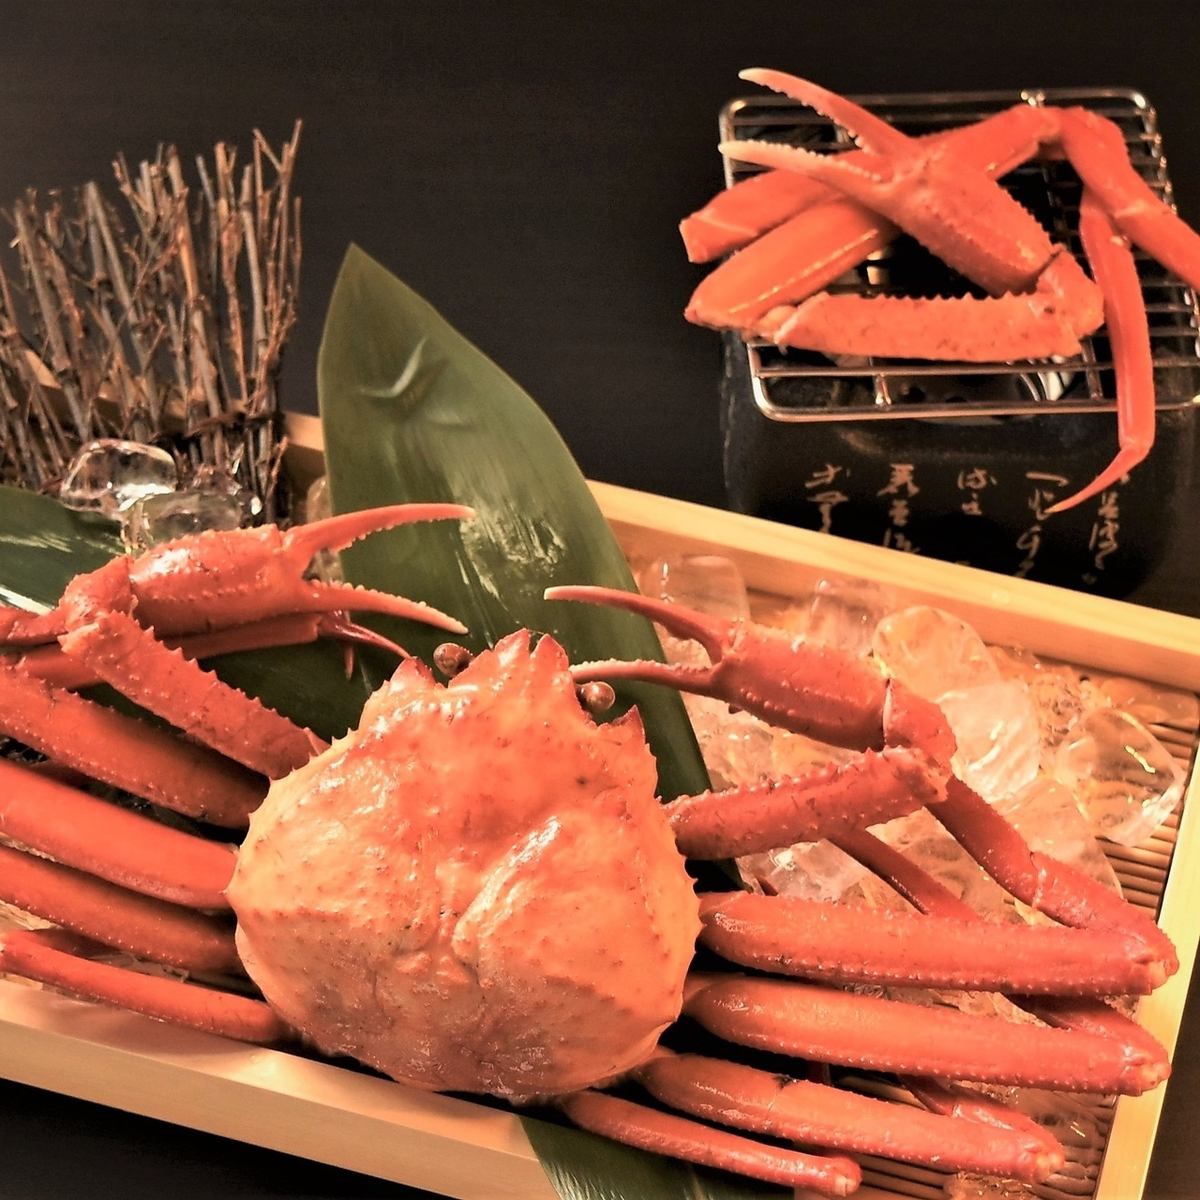 A sister restaurant of Gottsuo, a popular all-you-can-eat crab restaurant in Ueno, has reopened after renovation!